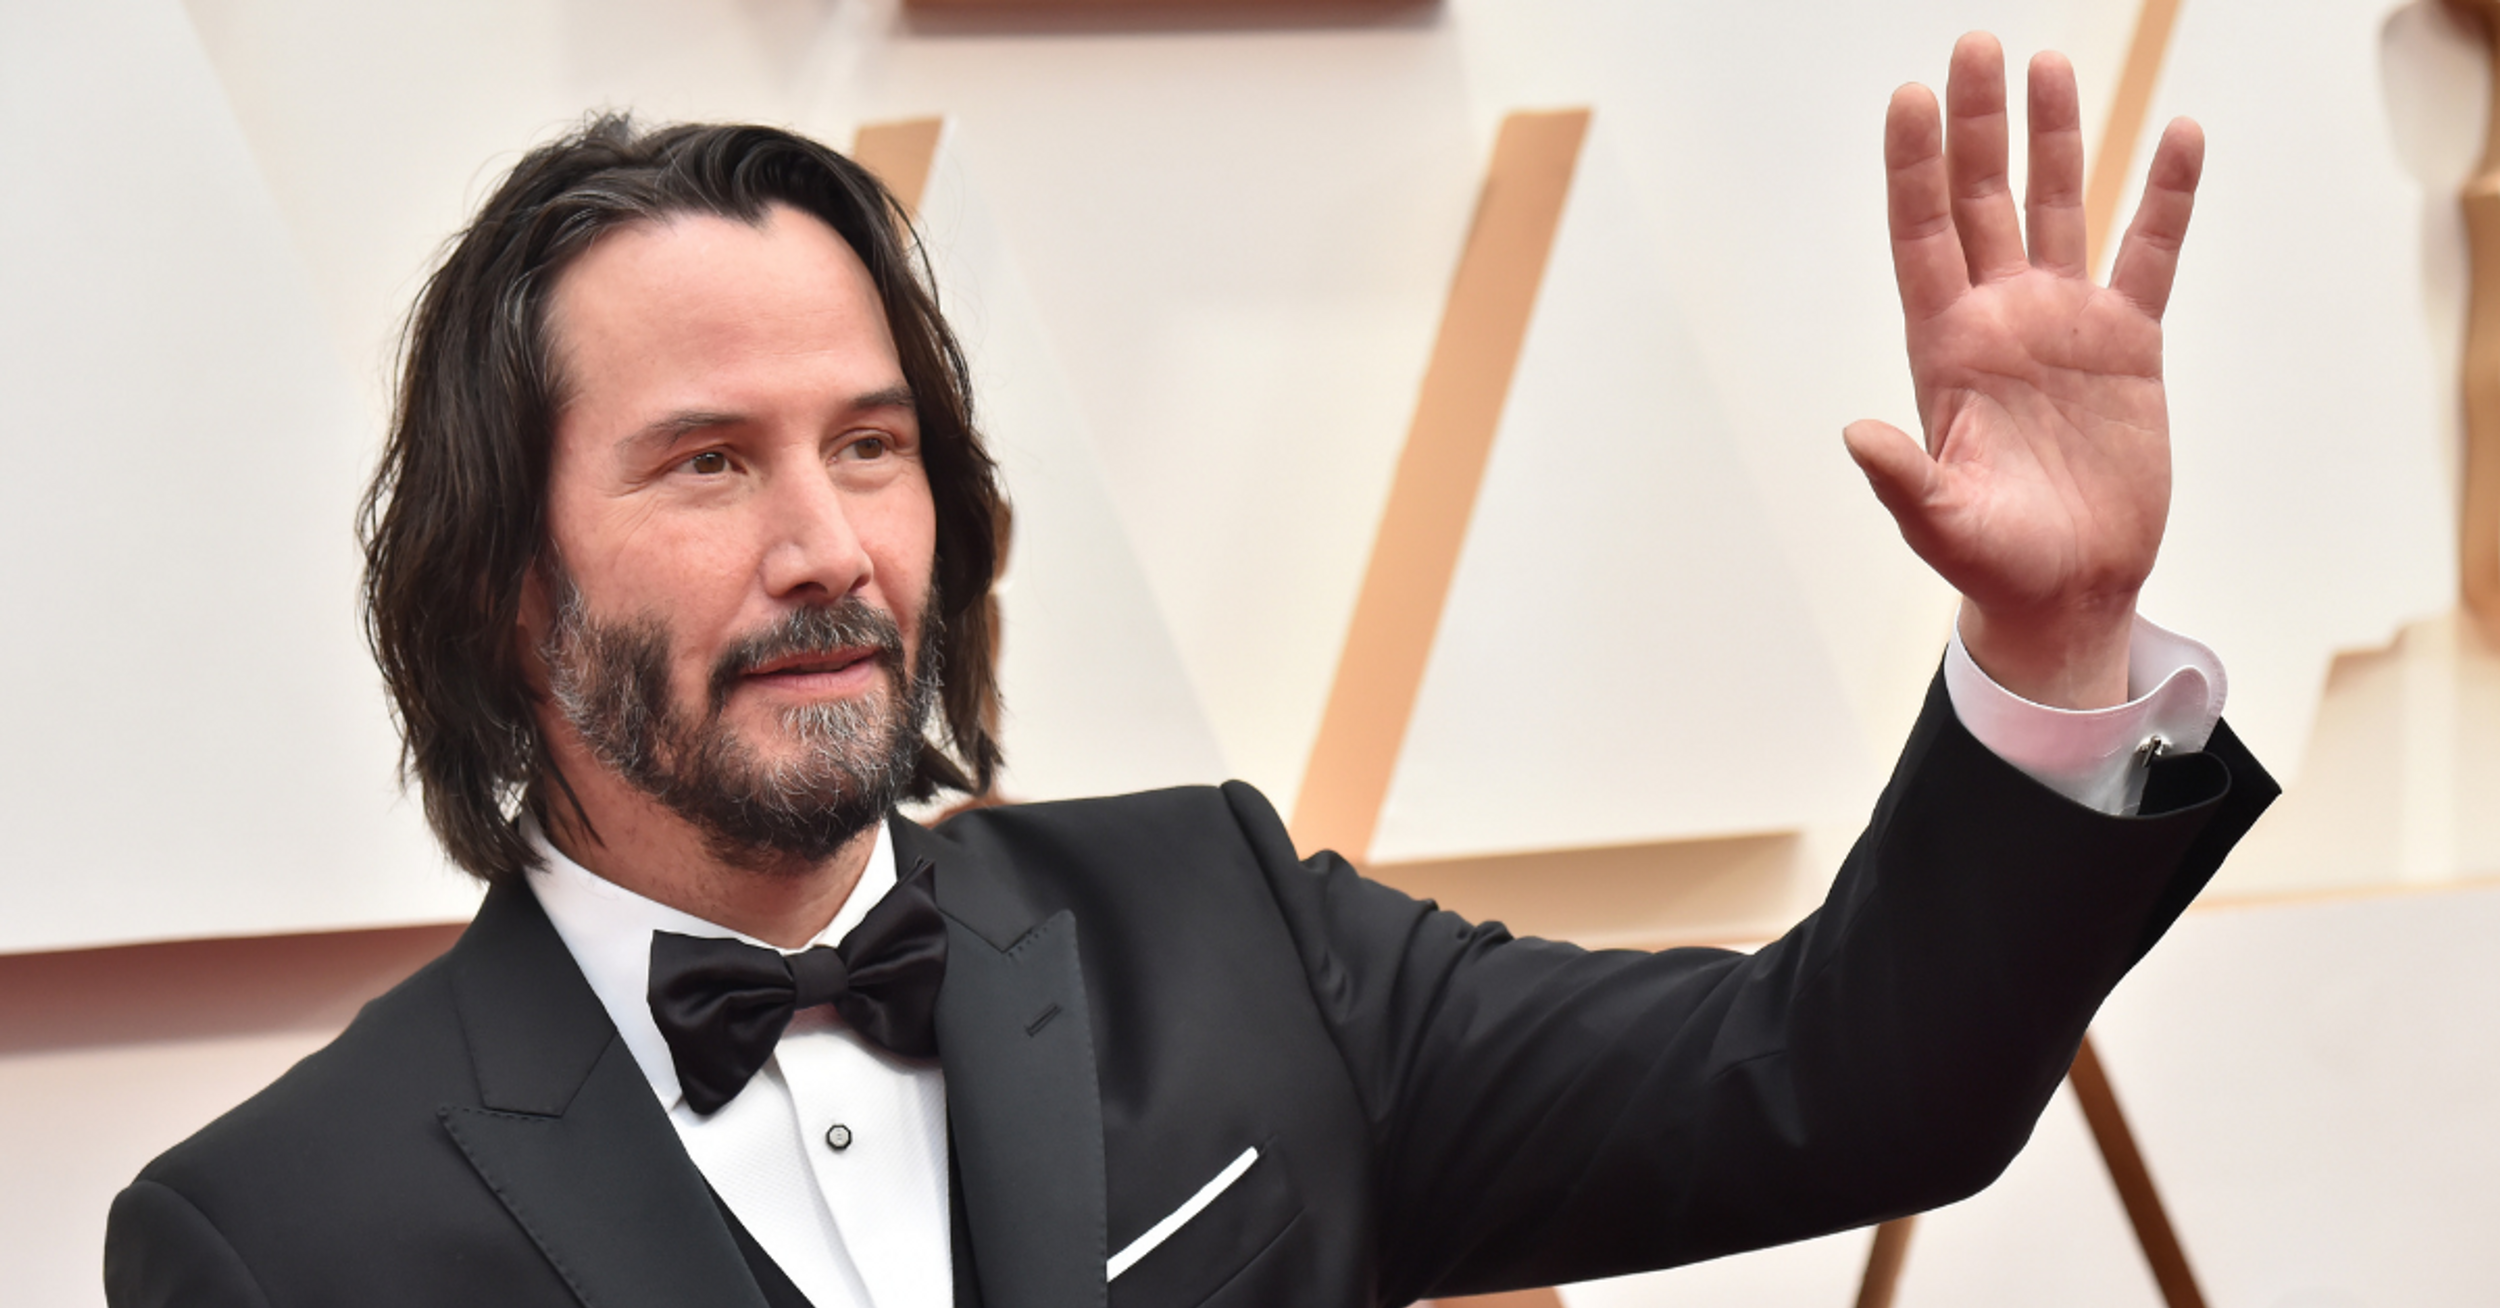 Sweet Story About An 80-Year-Old Grandma's Crush On Keanu Reeves Proves Why He's The Best